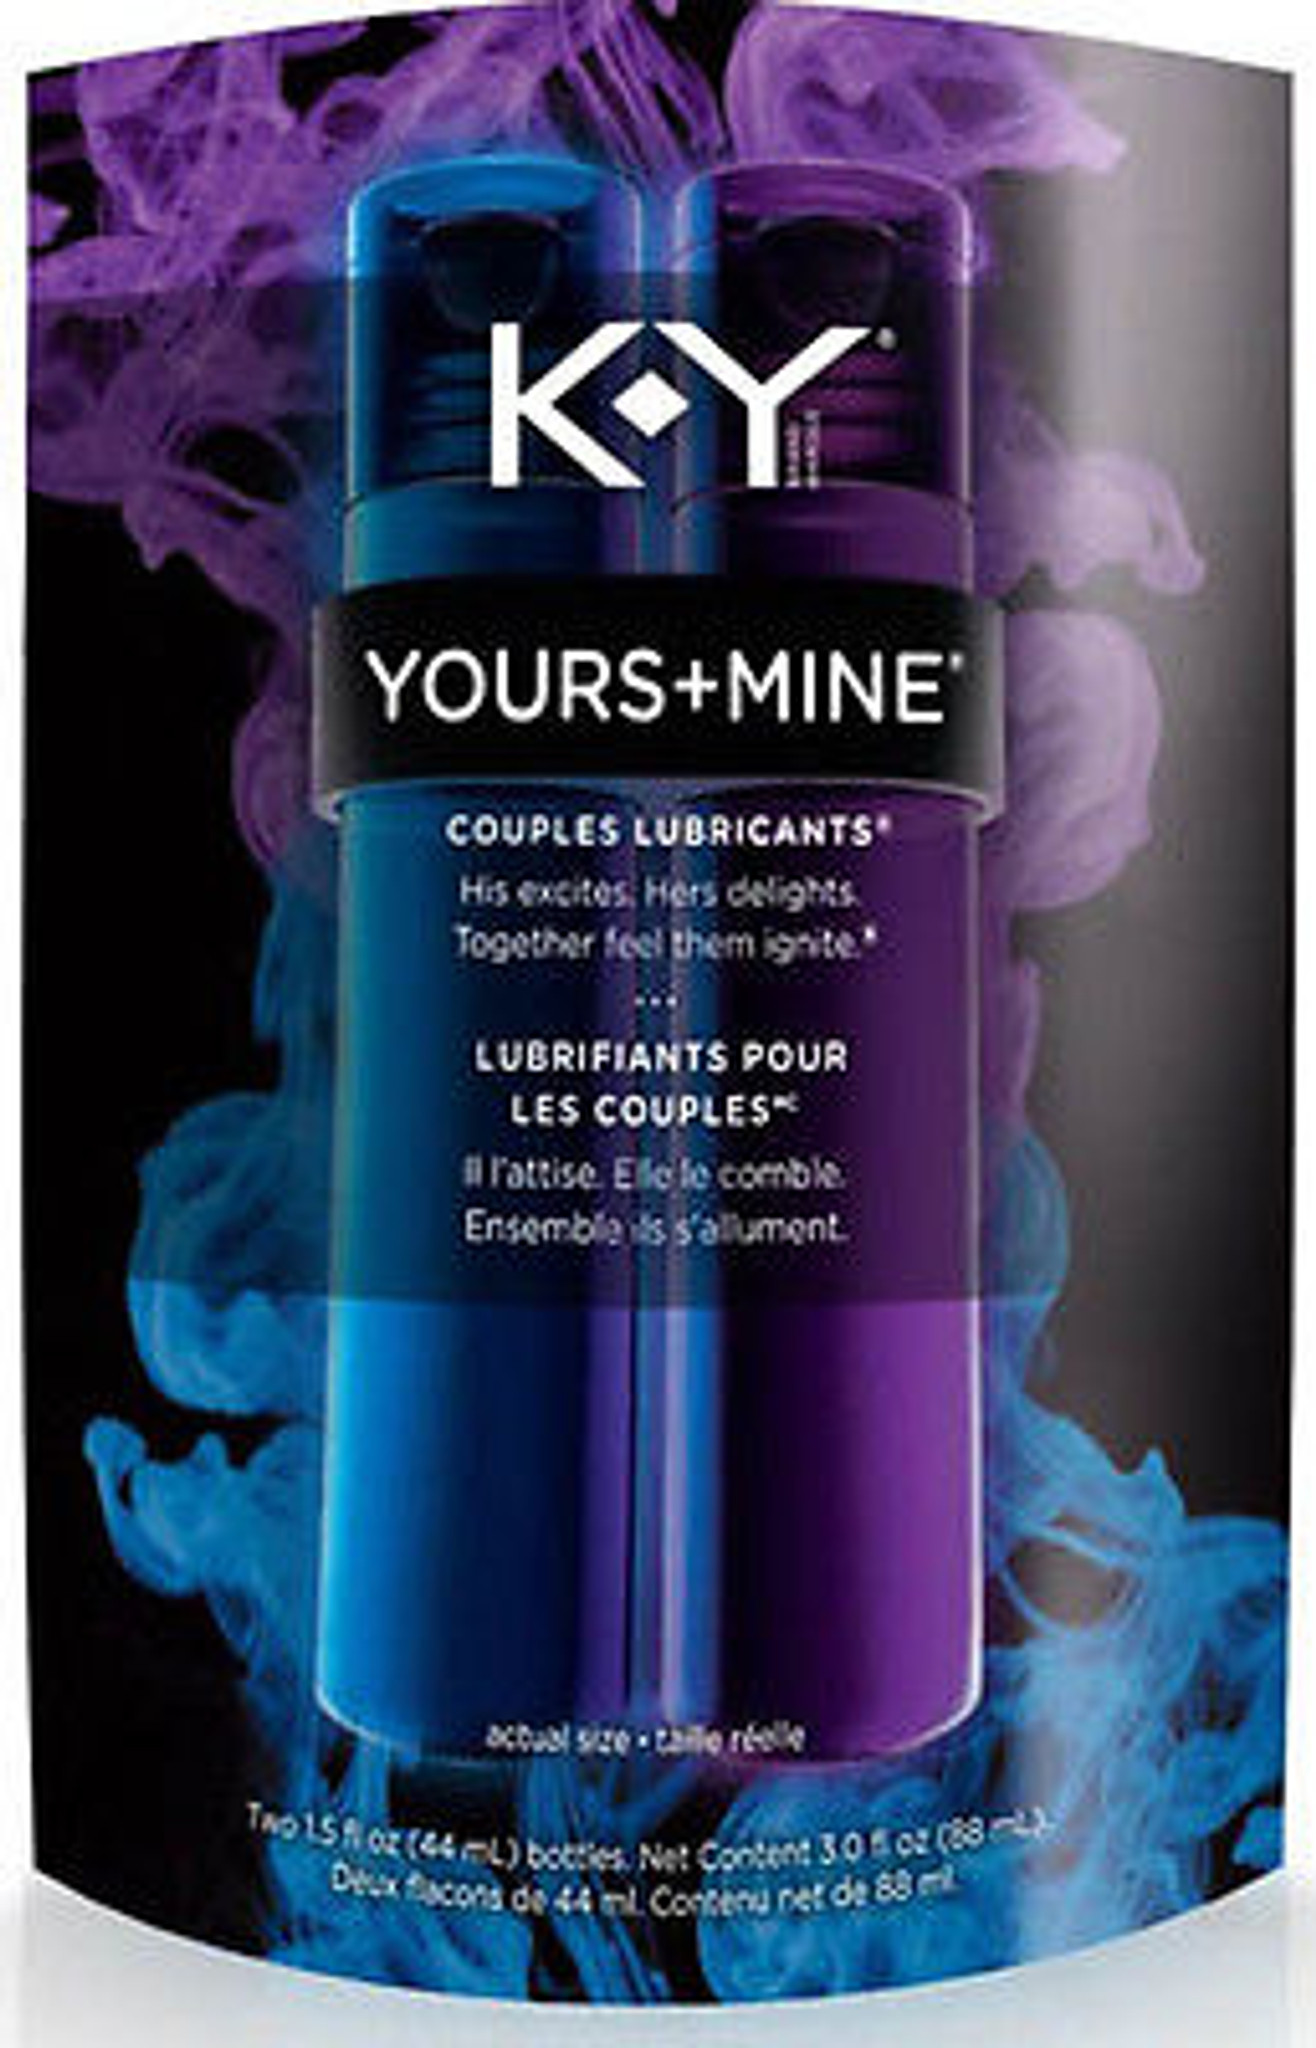 Couples　K-Y　Yours　Lubricants,　Mine　Personal　Ounce